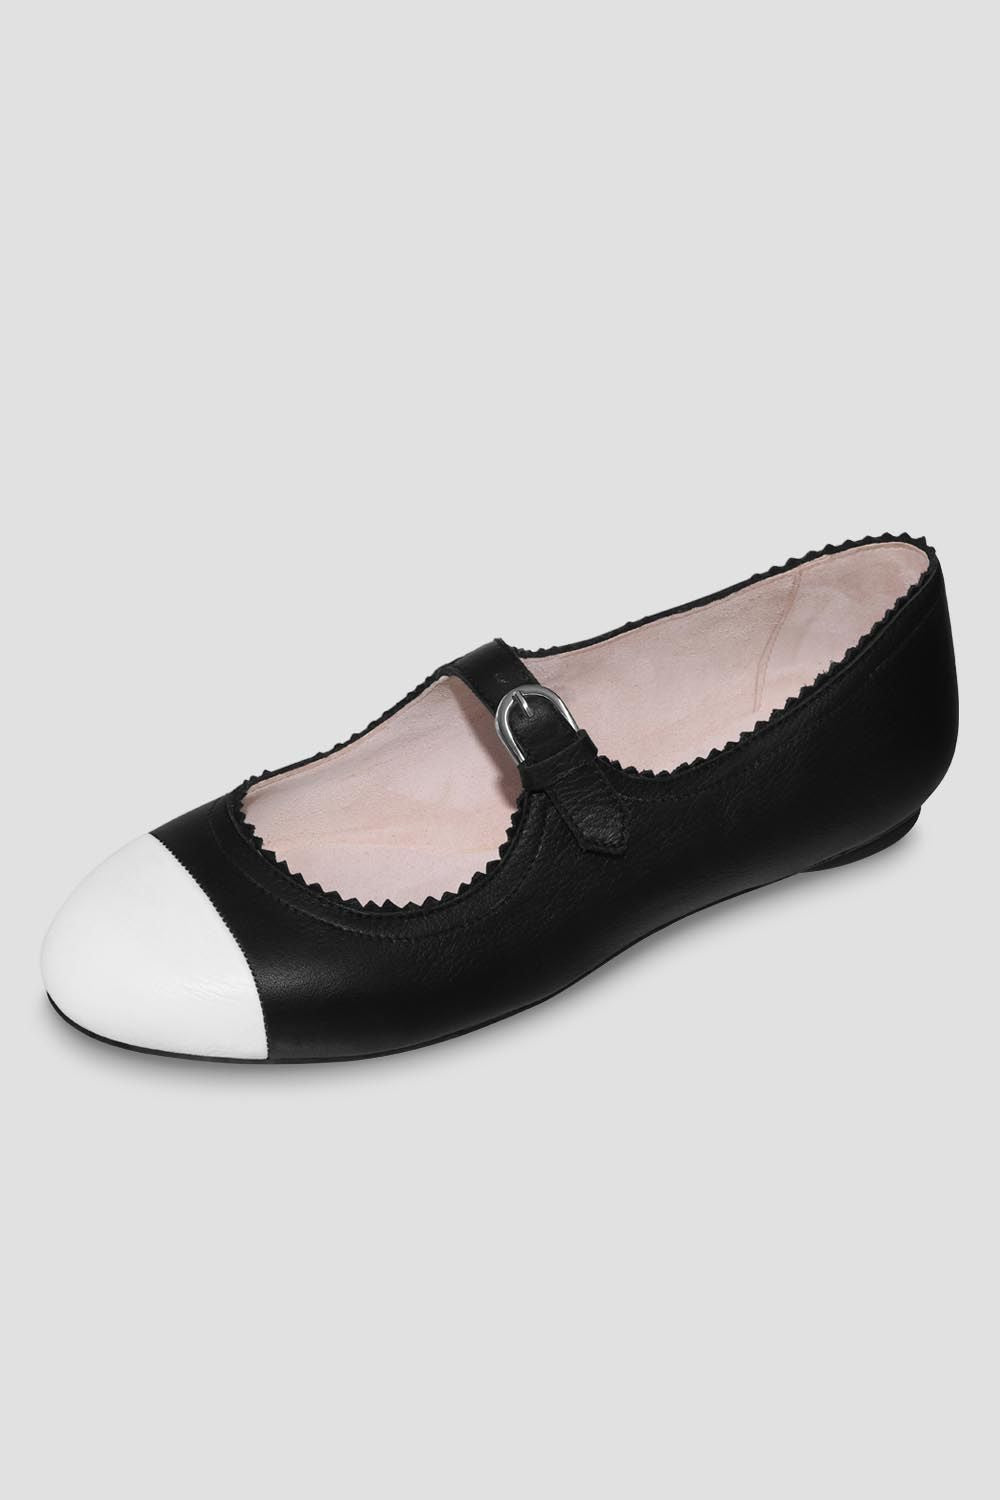 Bloch Ladies Cassiopeia Ballet Flats, Black White Leather